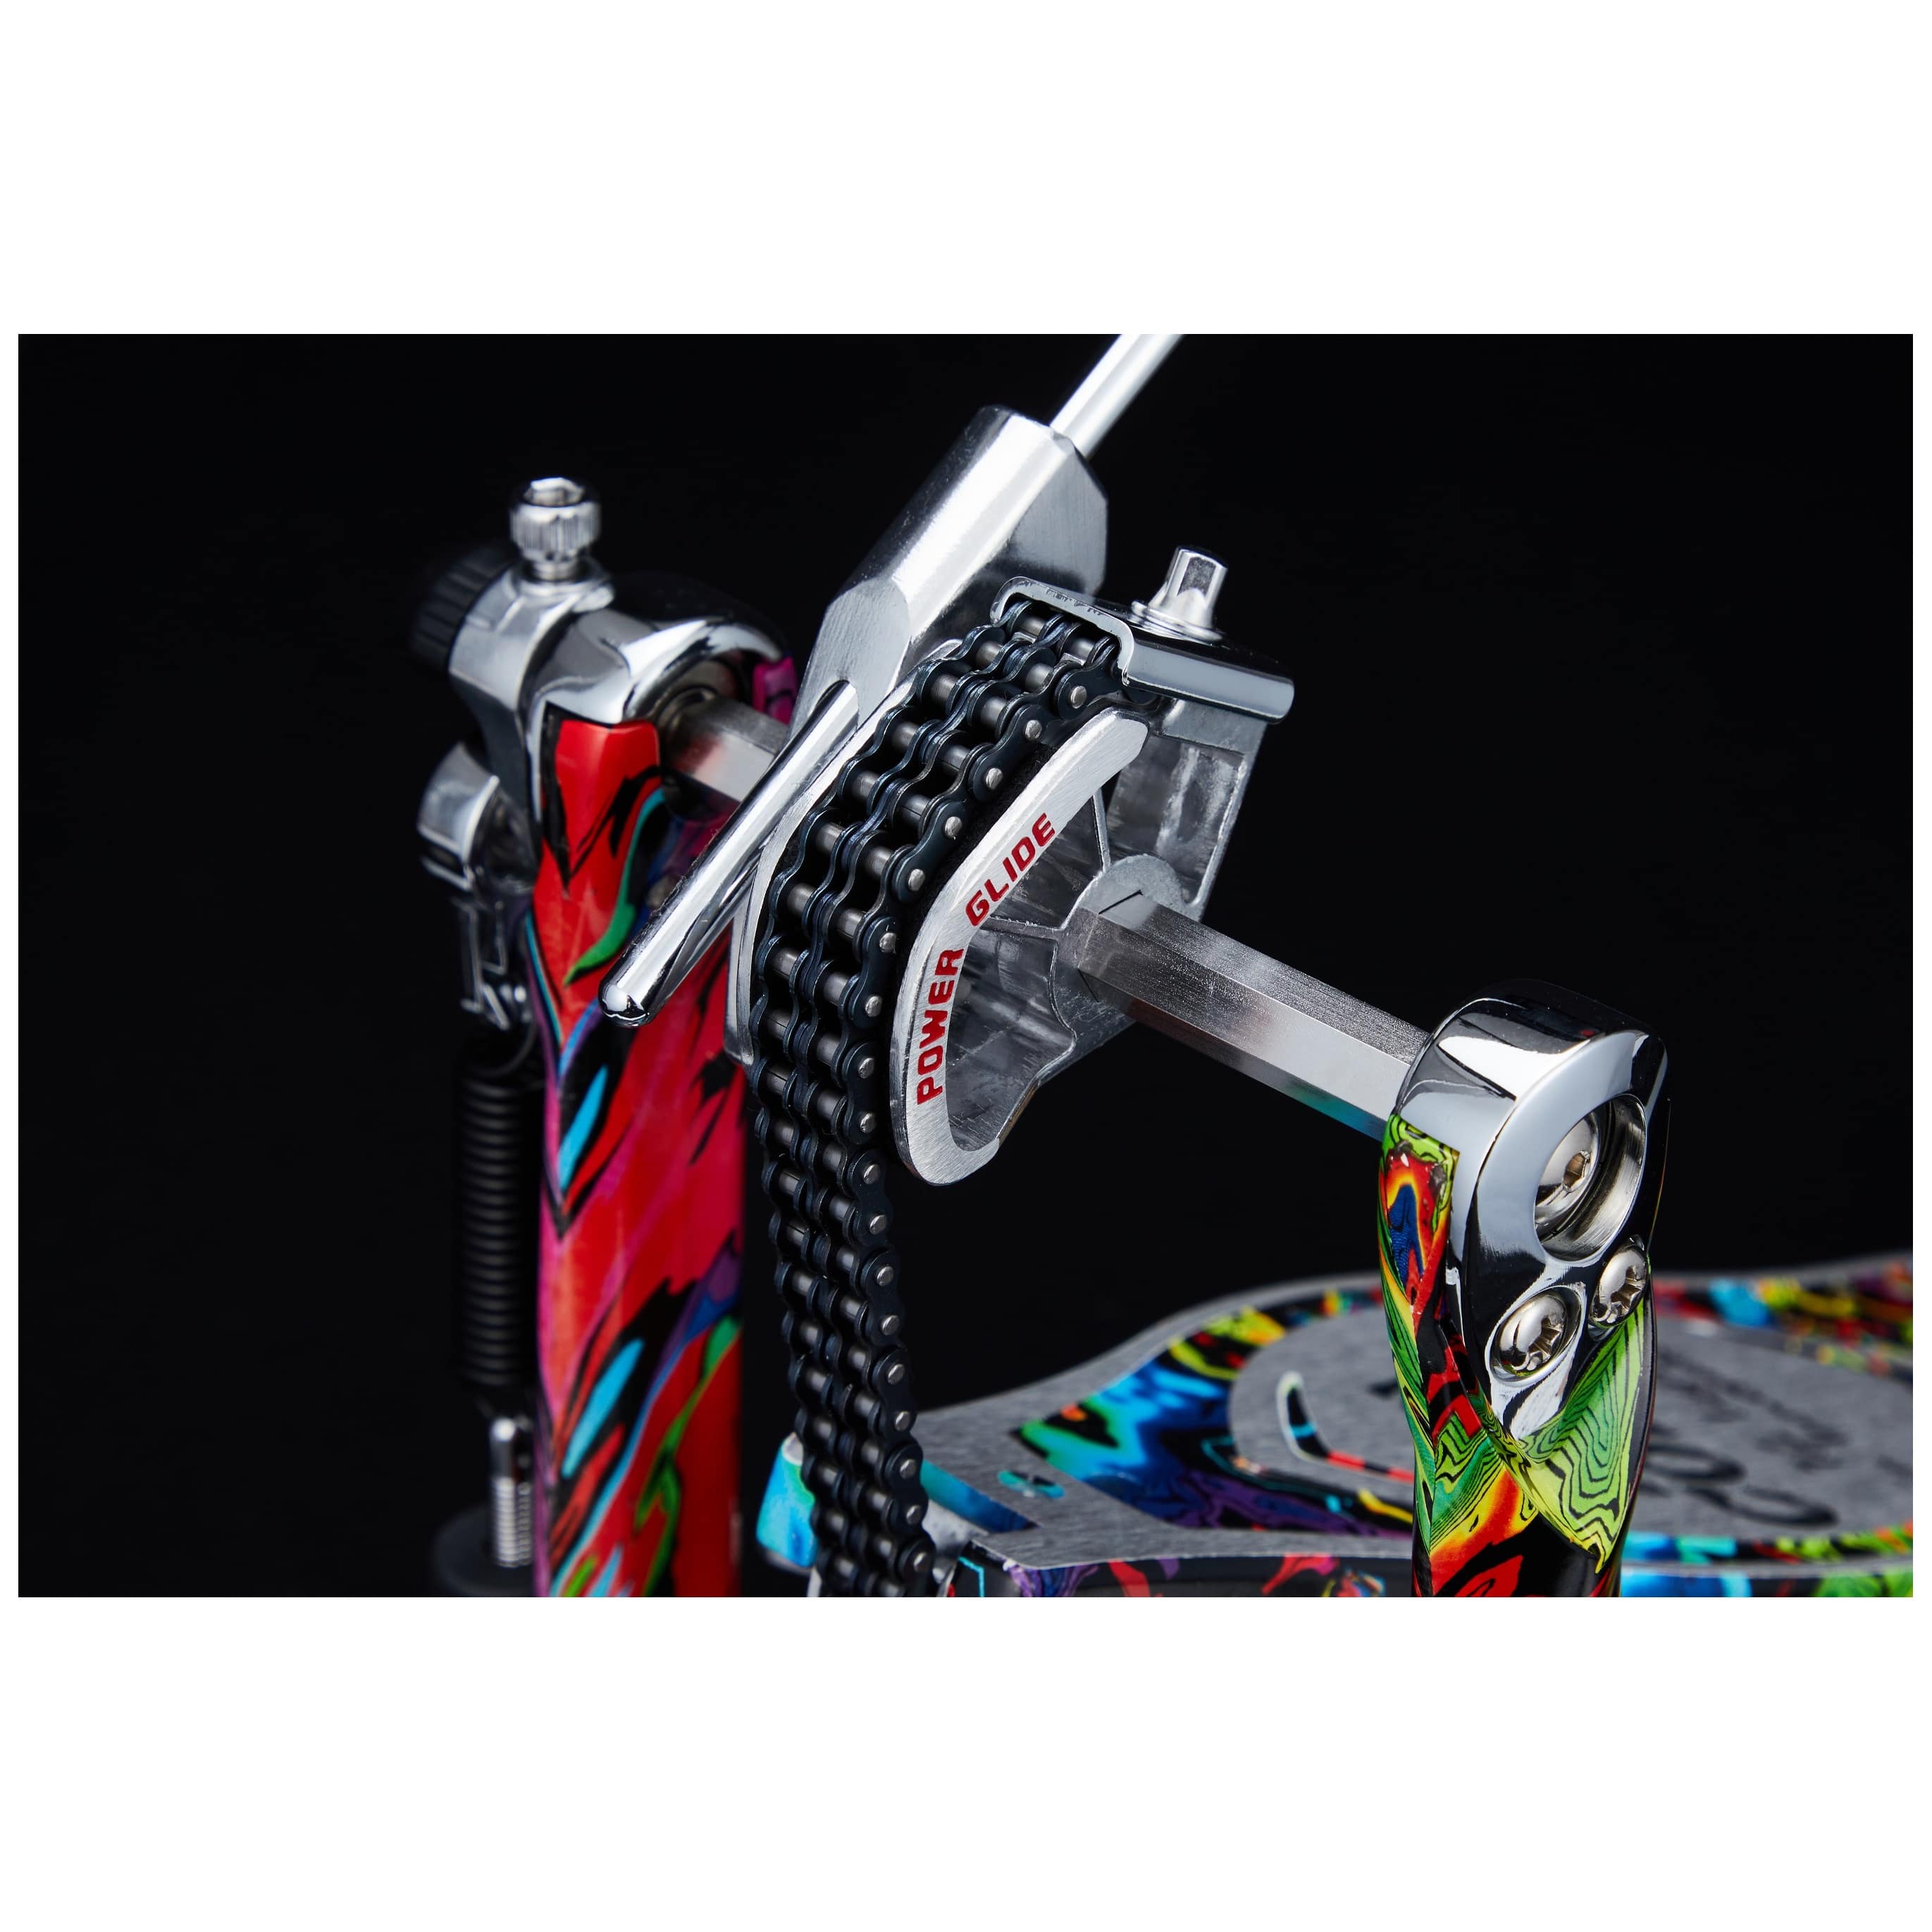 Tama HP900PMPR - 50th LIMITED - Iron Cobra 900 Power Glide Single Pedal - Marble Psychedelic Rainbow 3